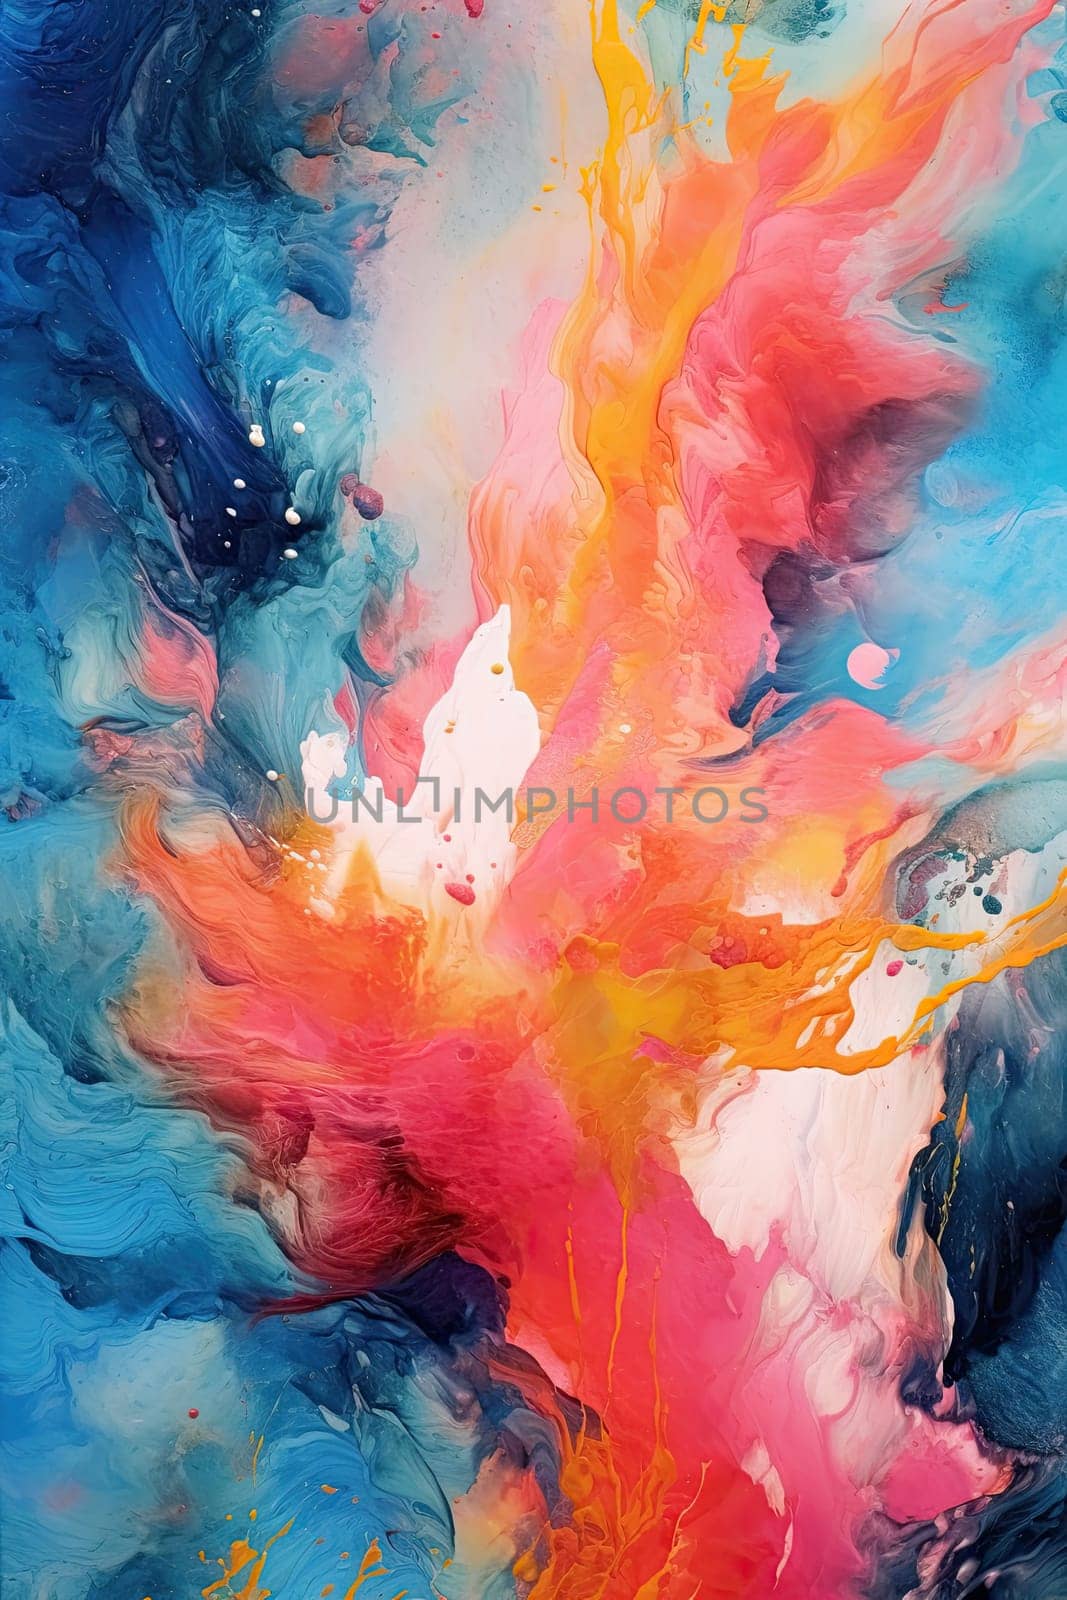 A mesmerizing abstract artwork with fluid brushstrokes and splashes of contrasting colors by simakovavector